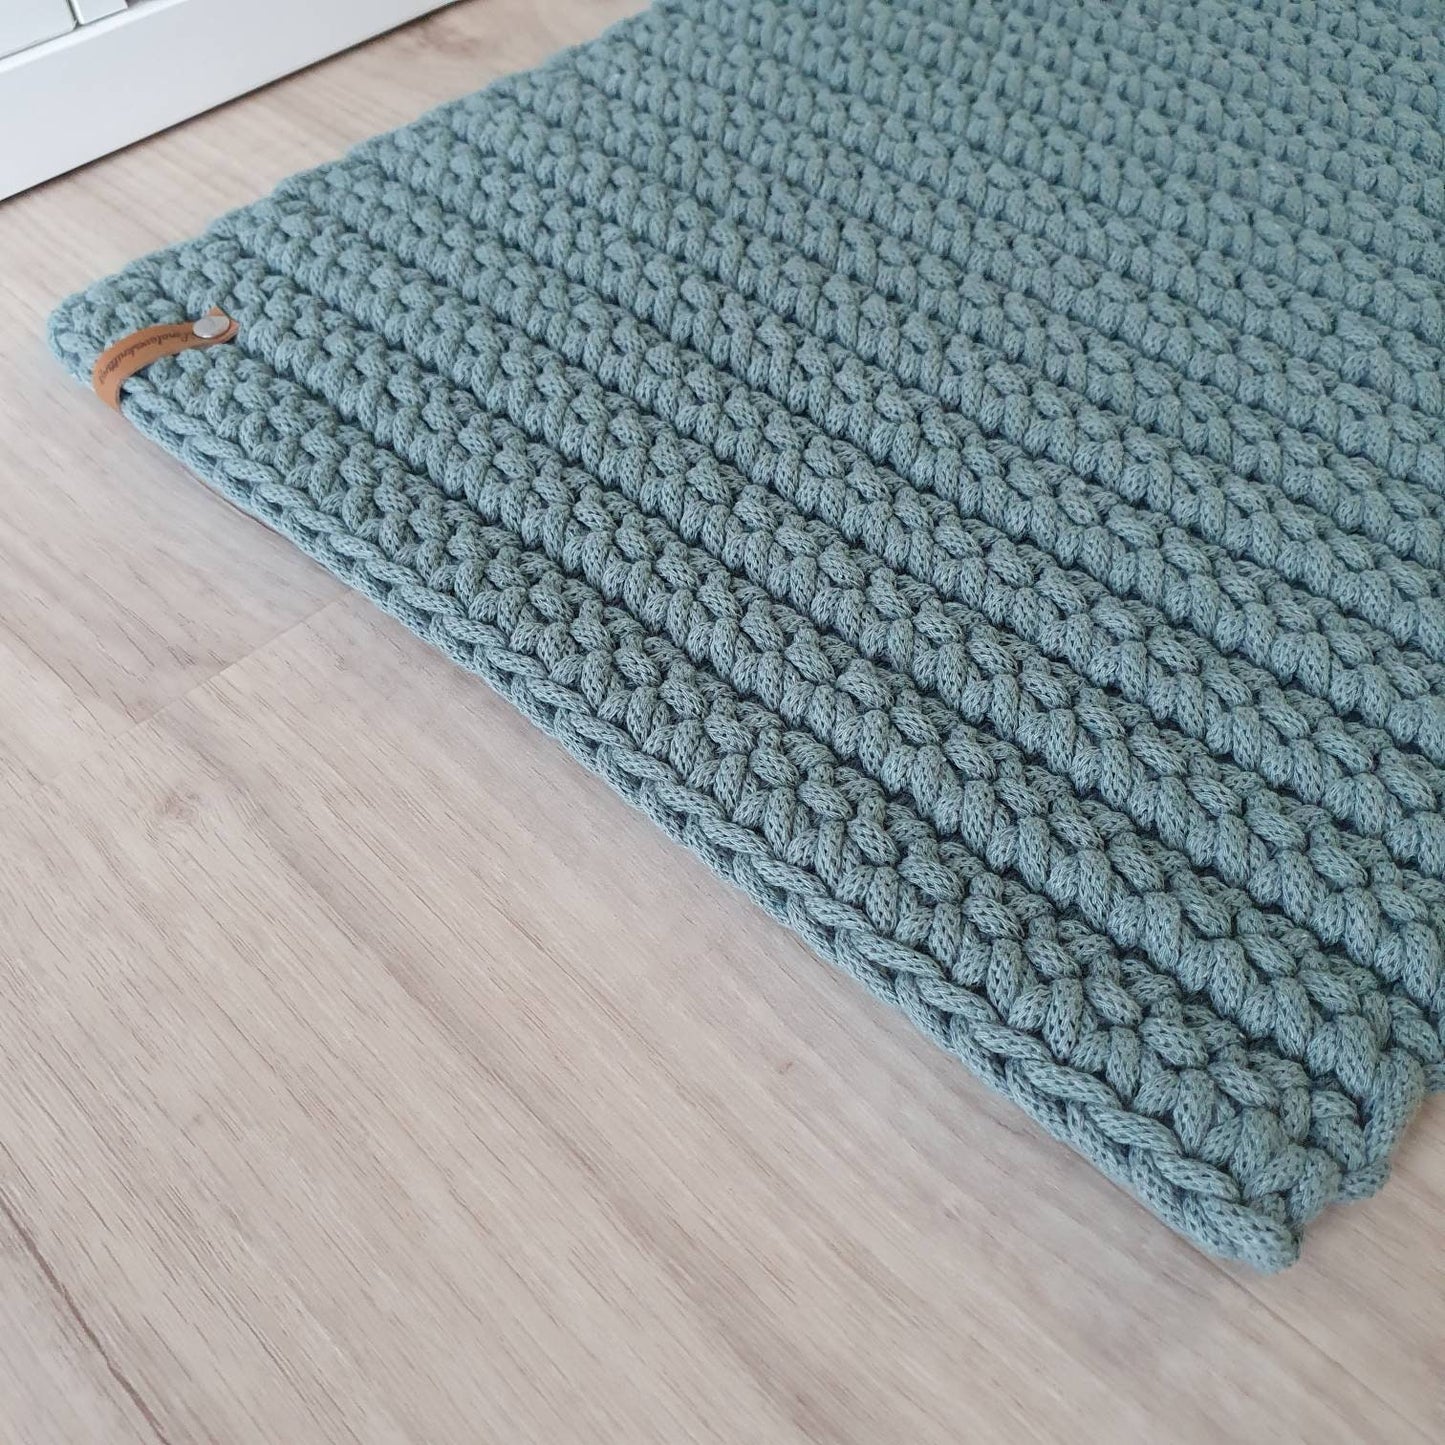 Handmade doormat crocheted from 100% washable recycled cotton